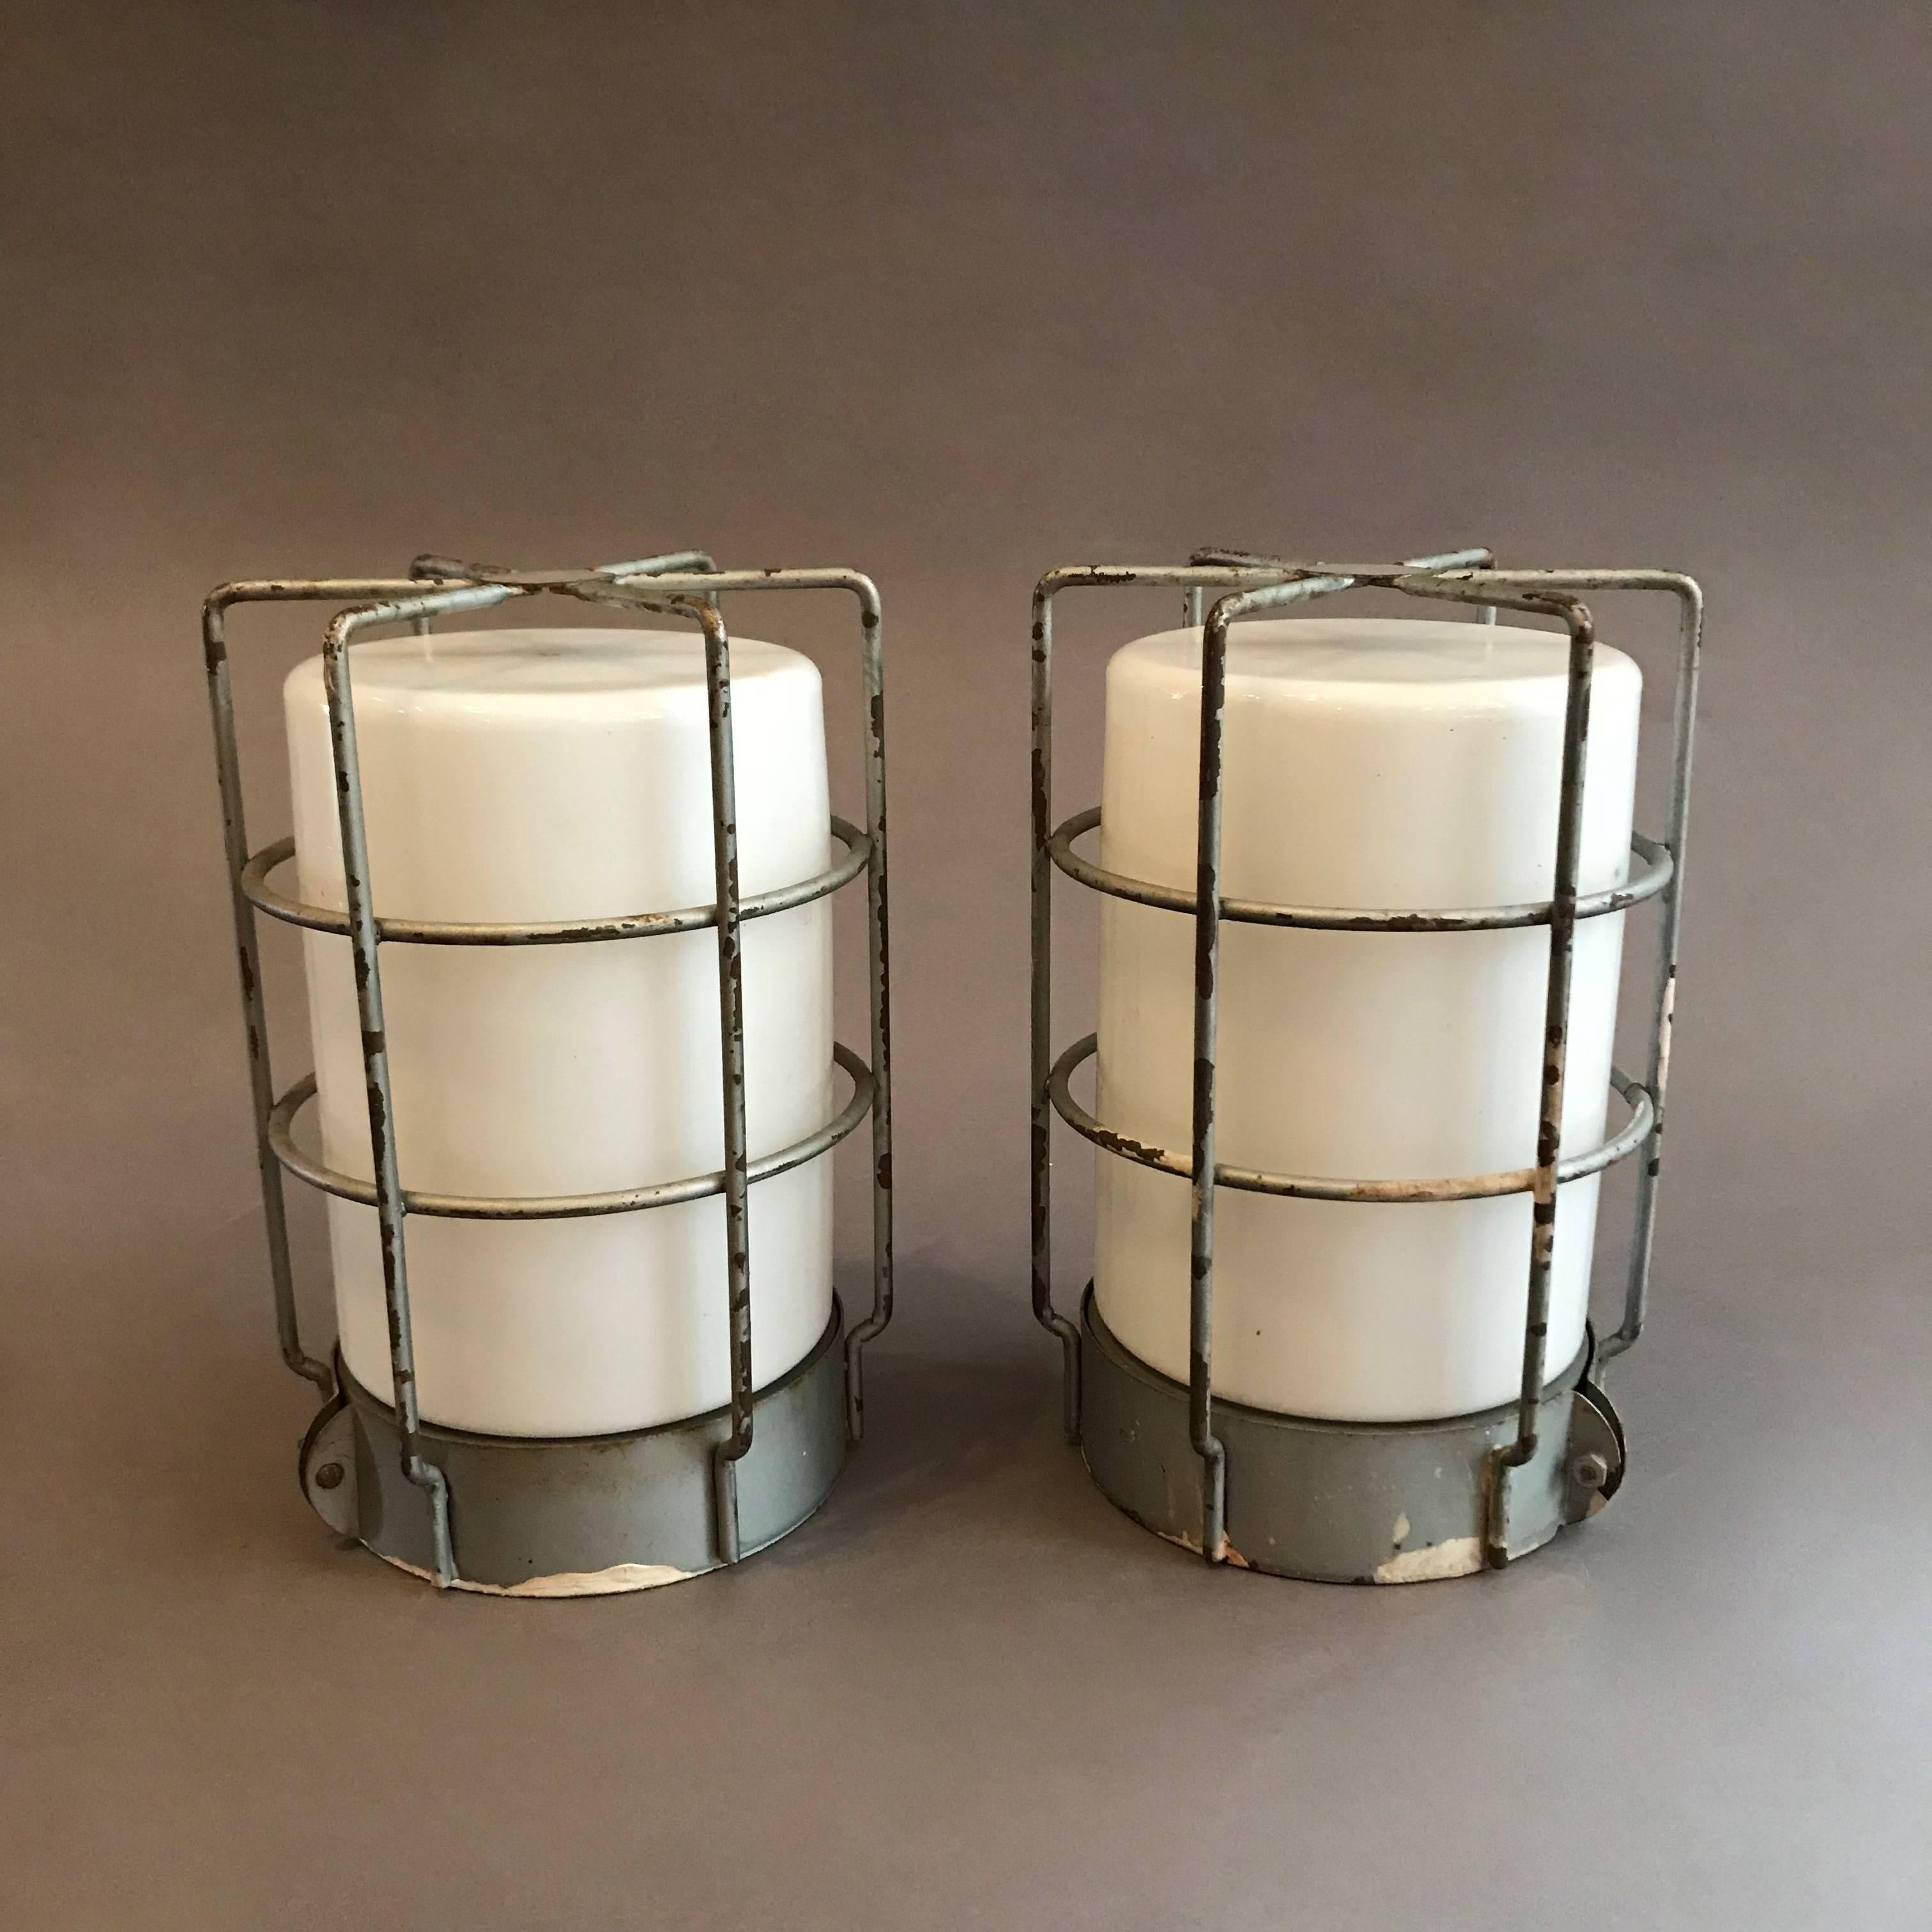 Pair of industrial, flush mount, ceiling light fixtures or wall sconces feature milk glass shades enclosed in steel cages. The fixtures are wired to accept 150 watt bulbs each.